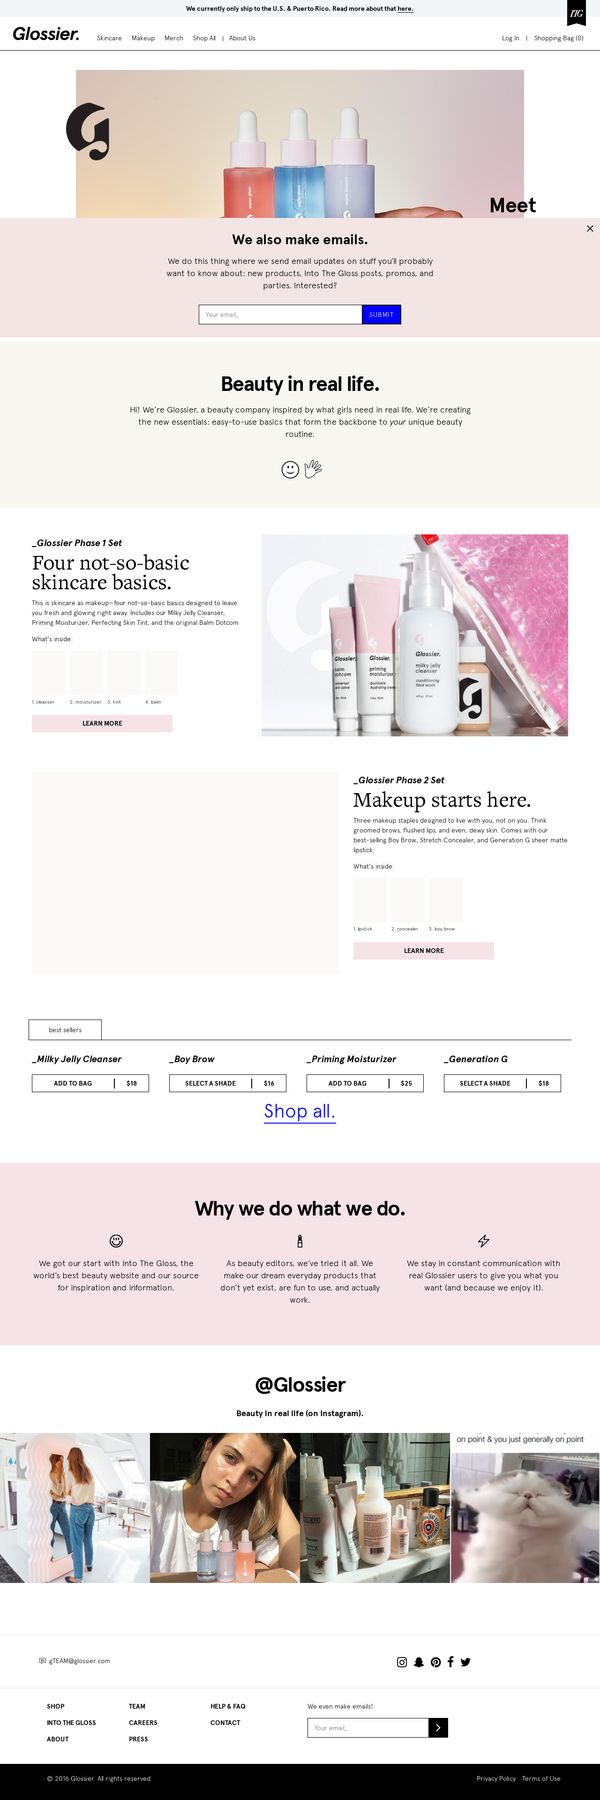 Not-So-Basic Skincare Routine & Facial Products | Glossier